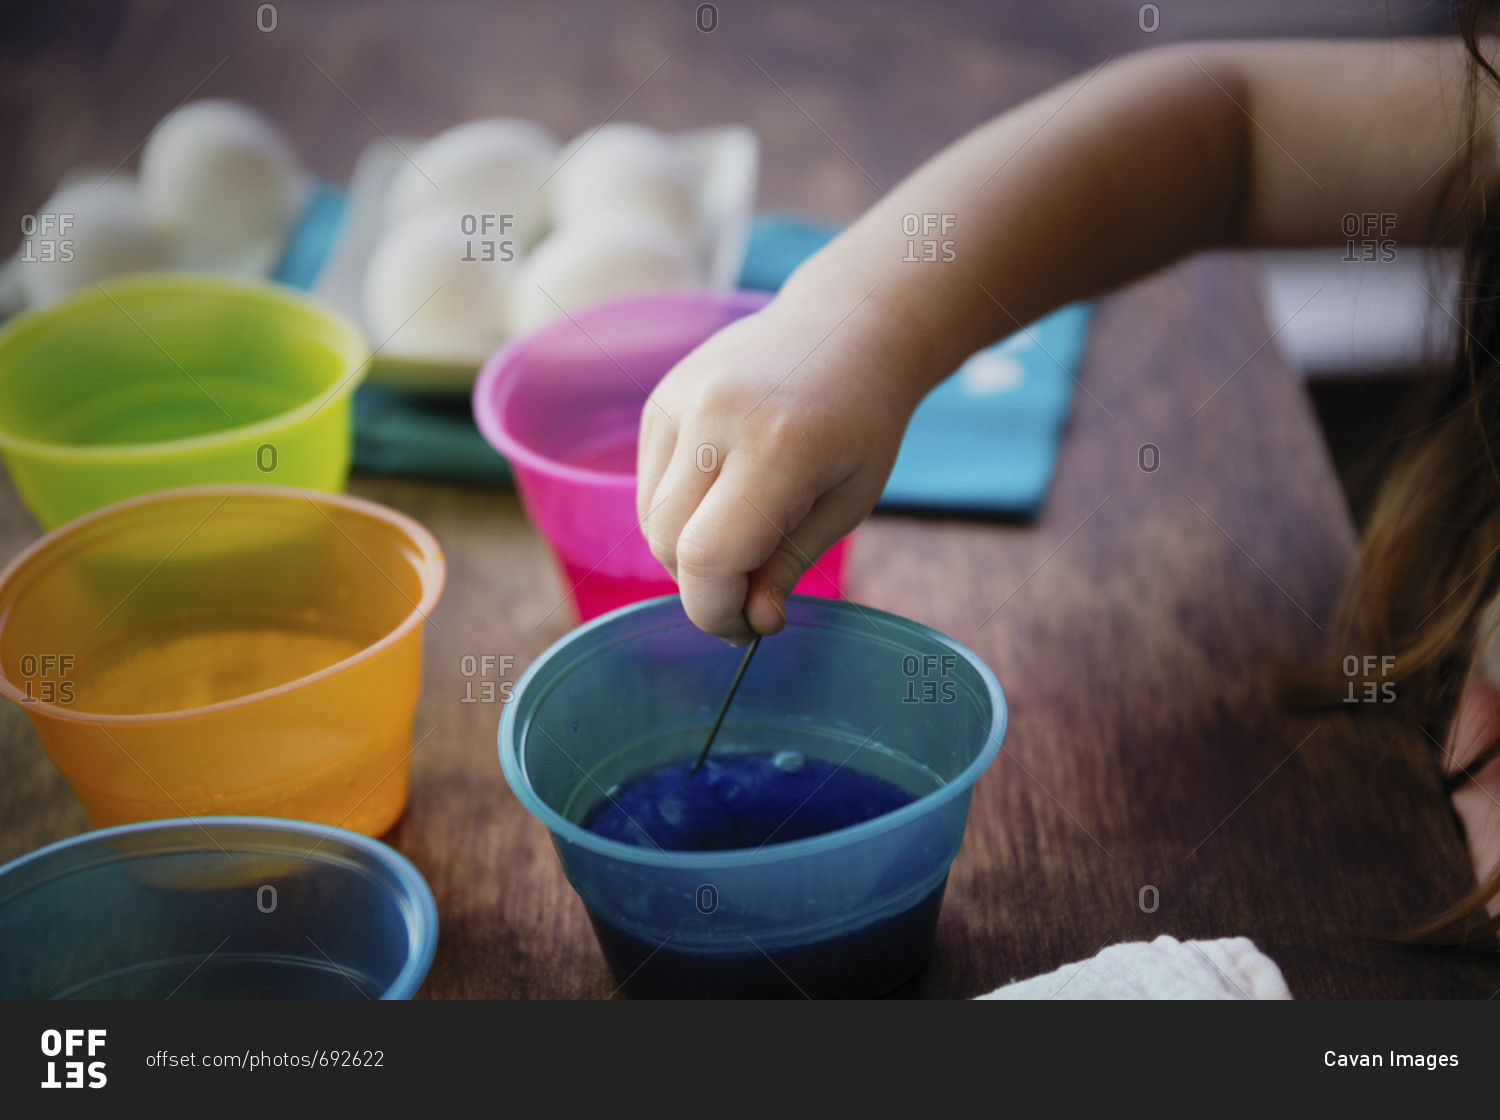 Cropped hand of girl using stirrer to mix dye in water for Easter Egg coloring on table